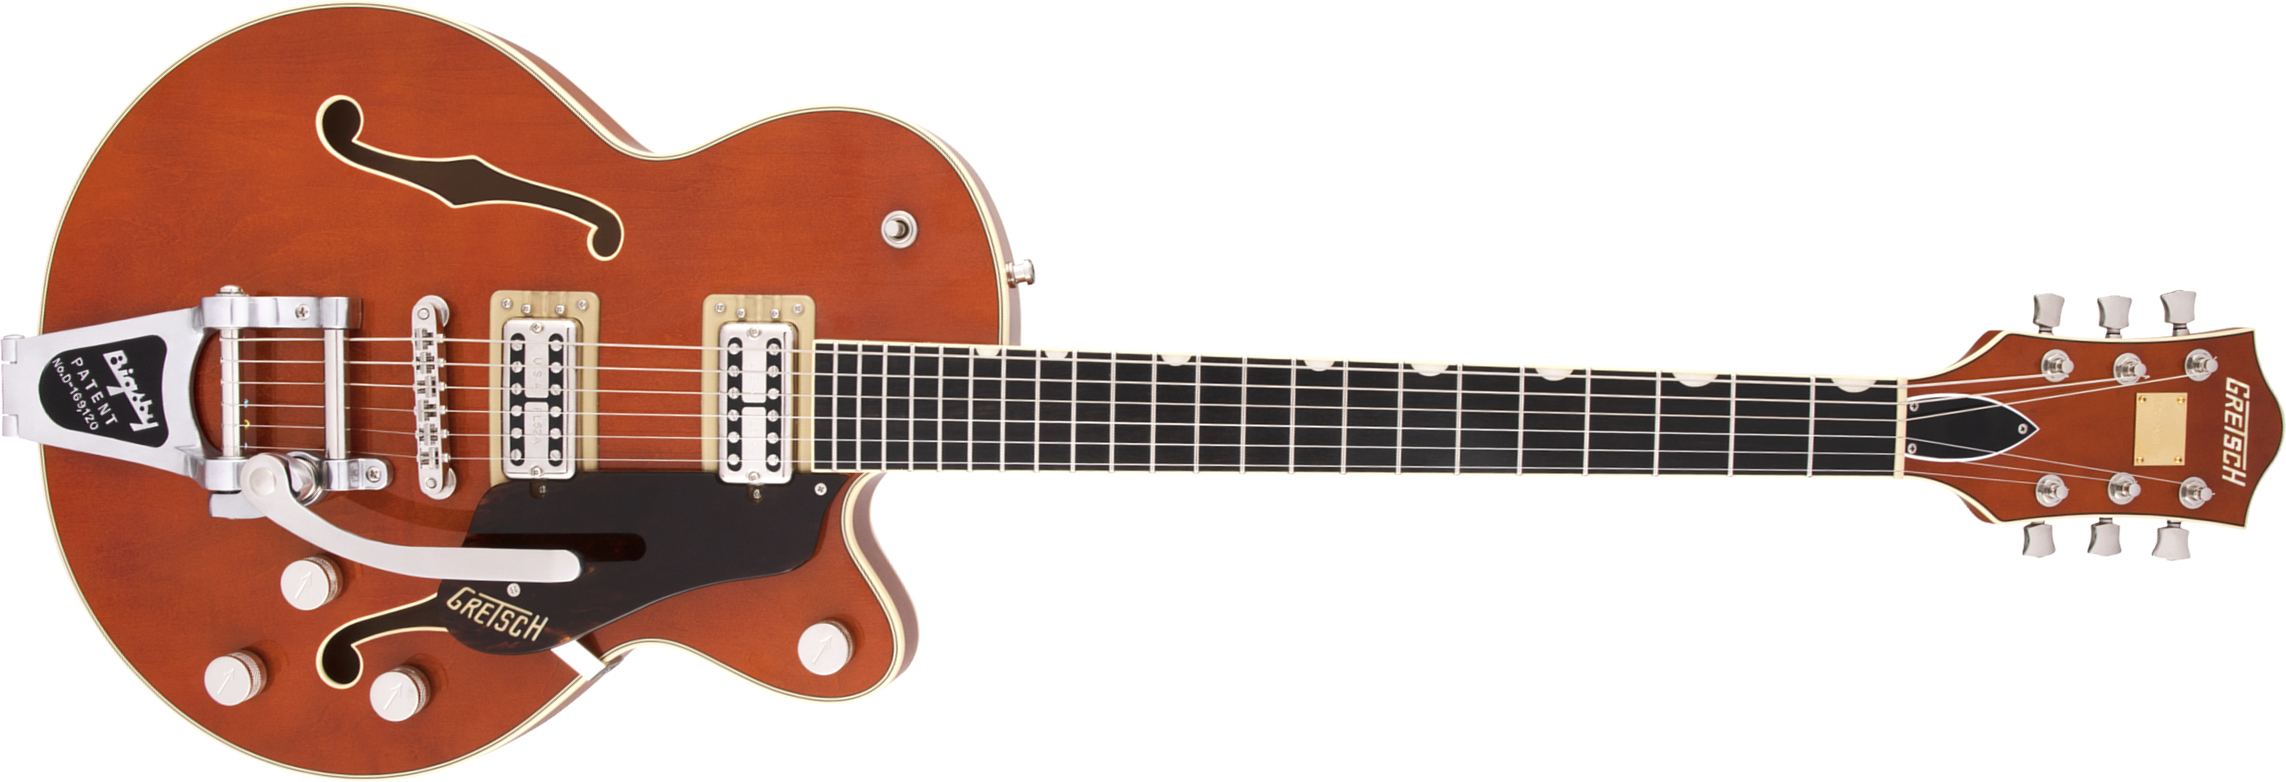 Gretsch G6659t Broadkaster Jr Center Bloc Players Edition Nashville Pro Jap Bigsby Eb - Roundup Orange - Semi-hollow electric guitar - Main picture